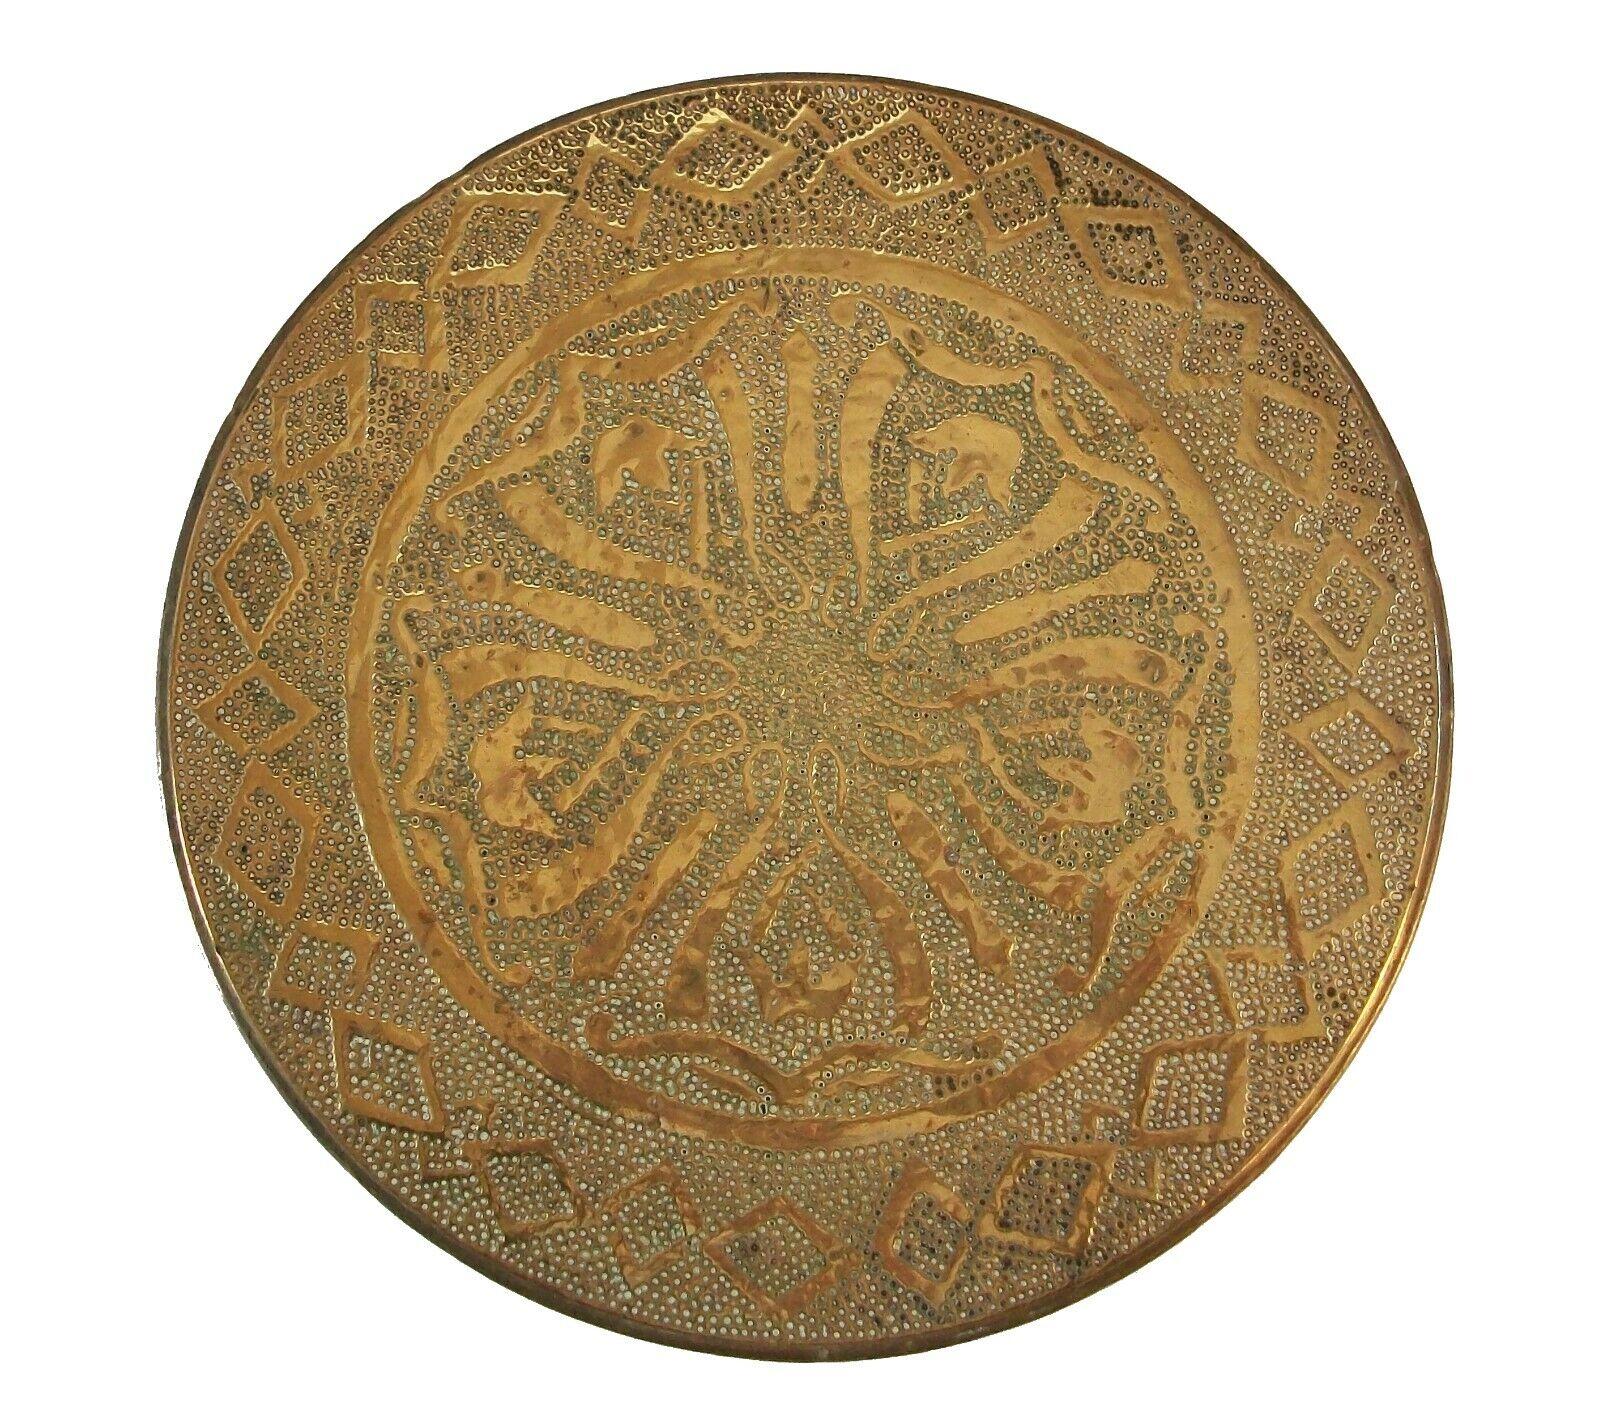 Rare antique American needle embossed circular brass trivet with central tulip pattern - Arts & Crafts style - diamond shaped border - stepped edge - wood base with hand hammered brass feet/balls - unsigned - United States - circa 1910.

Excellent